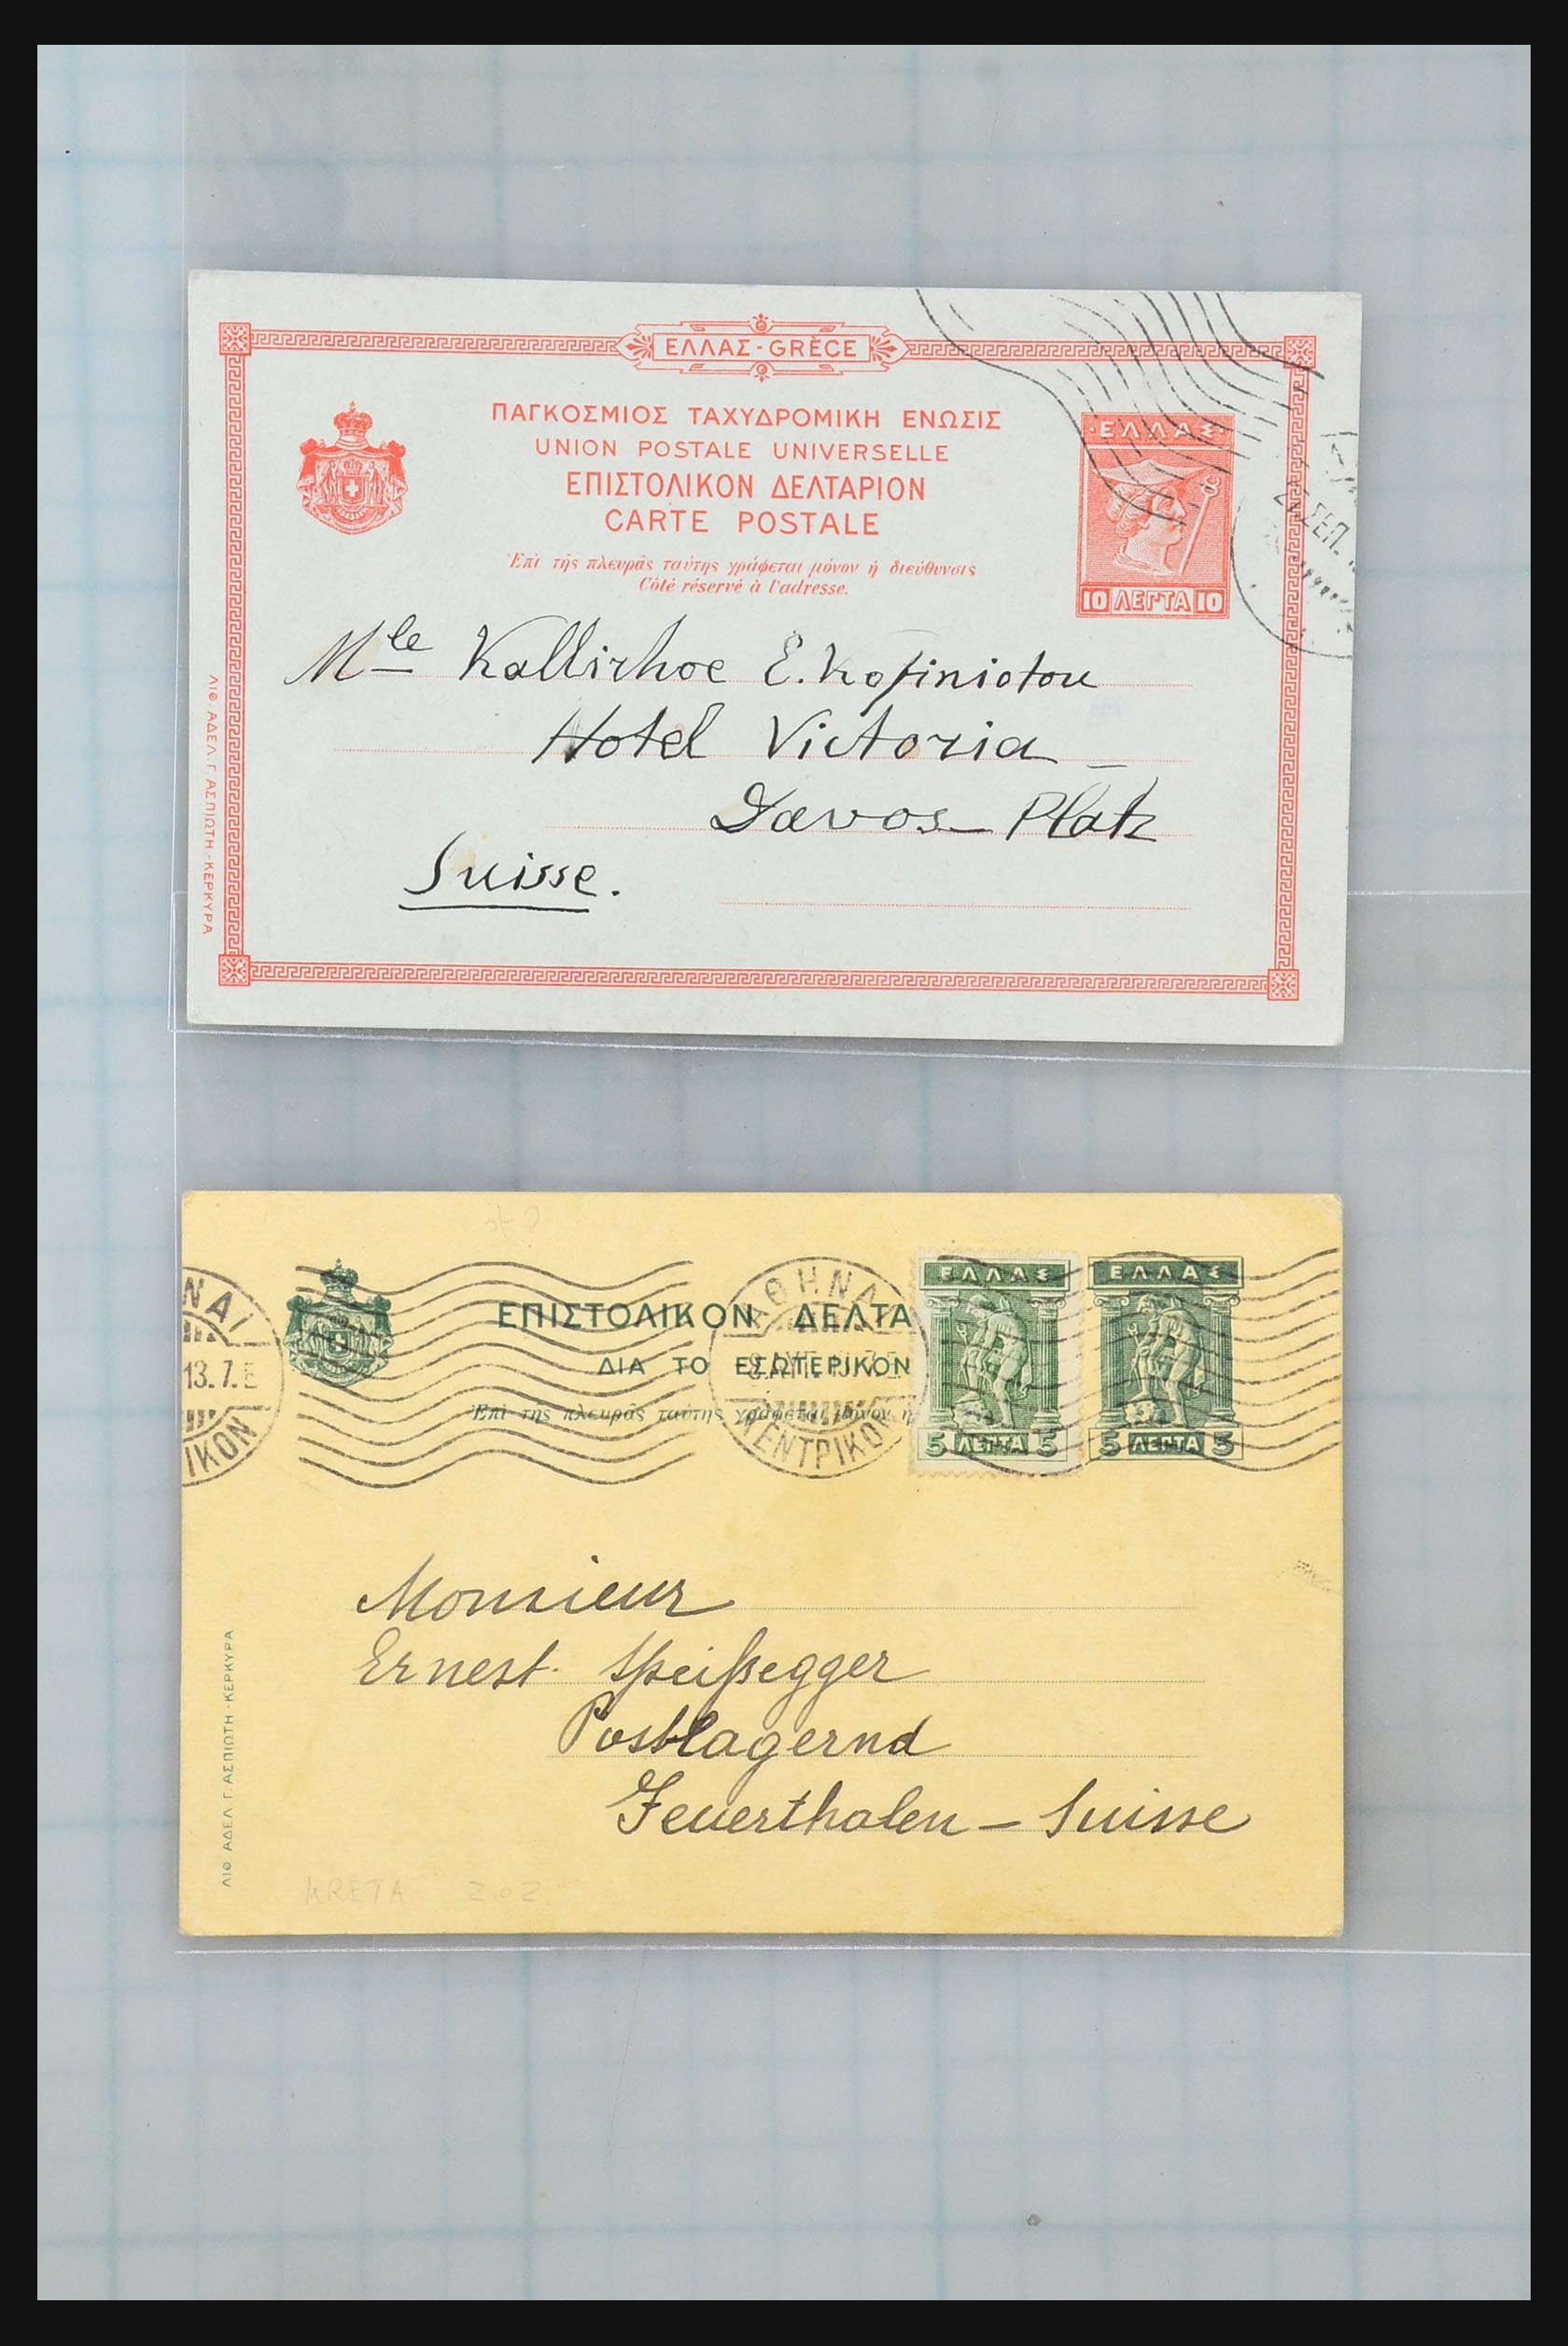 31358 030 - 31358 Portugal/Luxemburg/Greece covers 1880-1960.